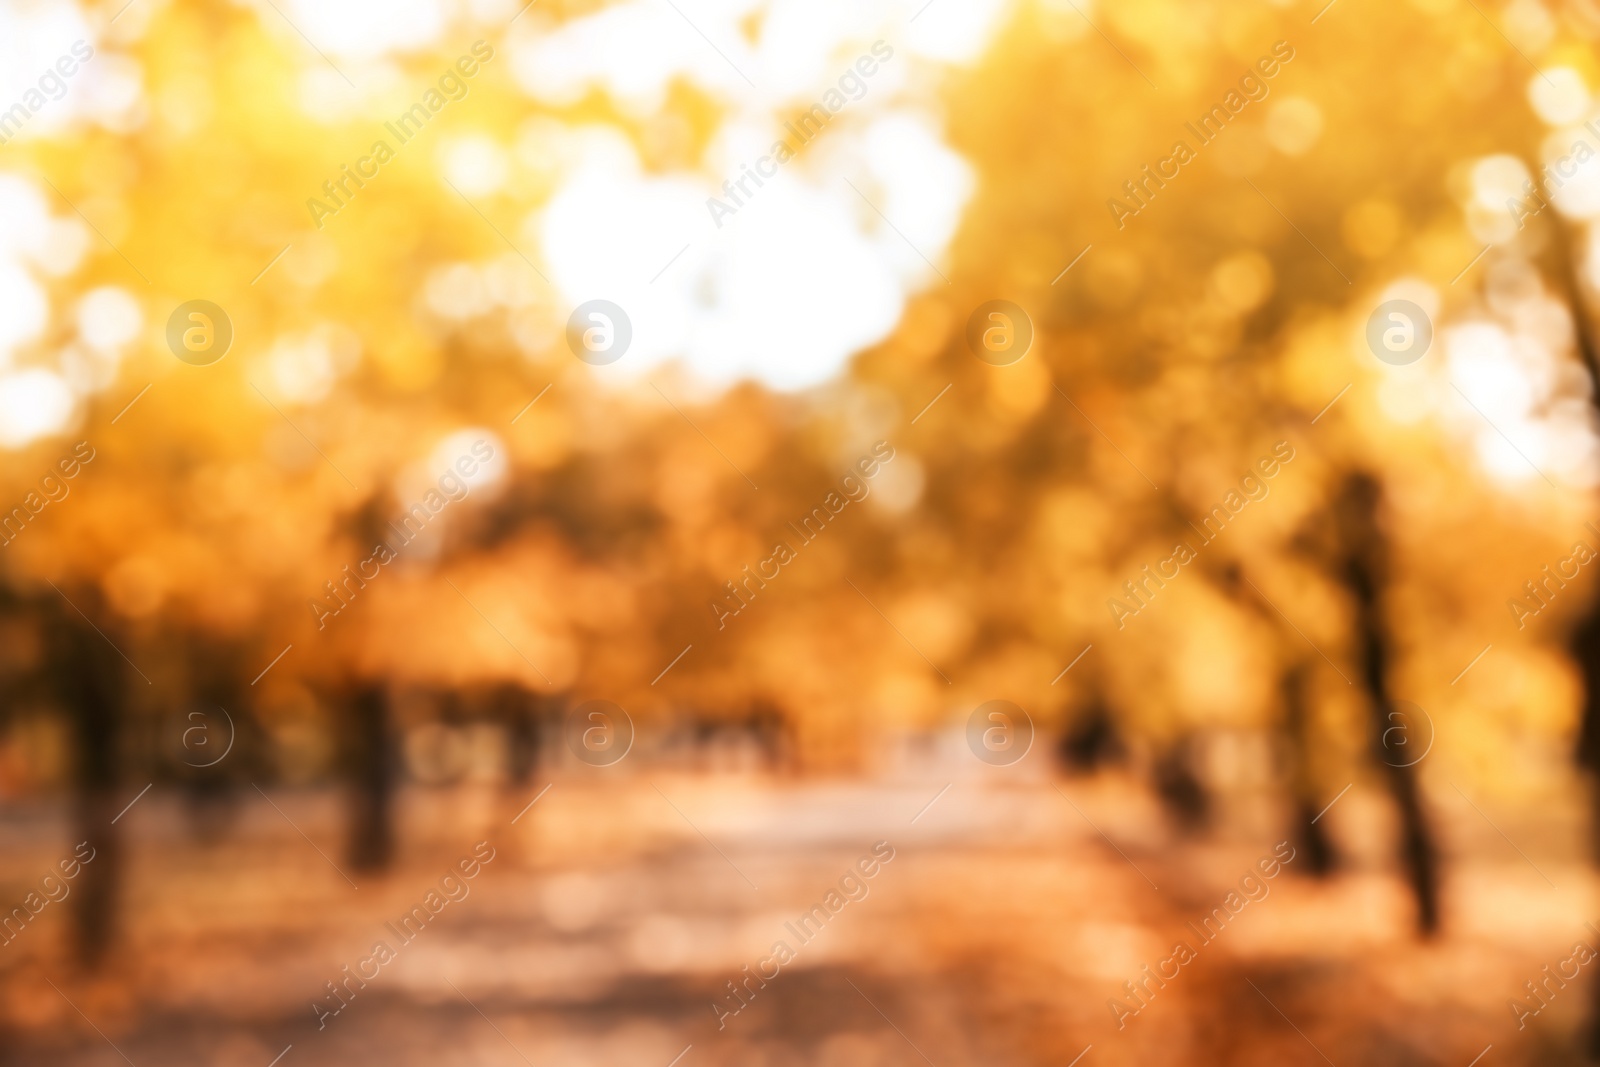 Photo of Blurred view of trees with bright leaves in park. Autumn landscape